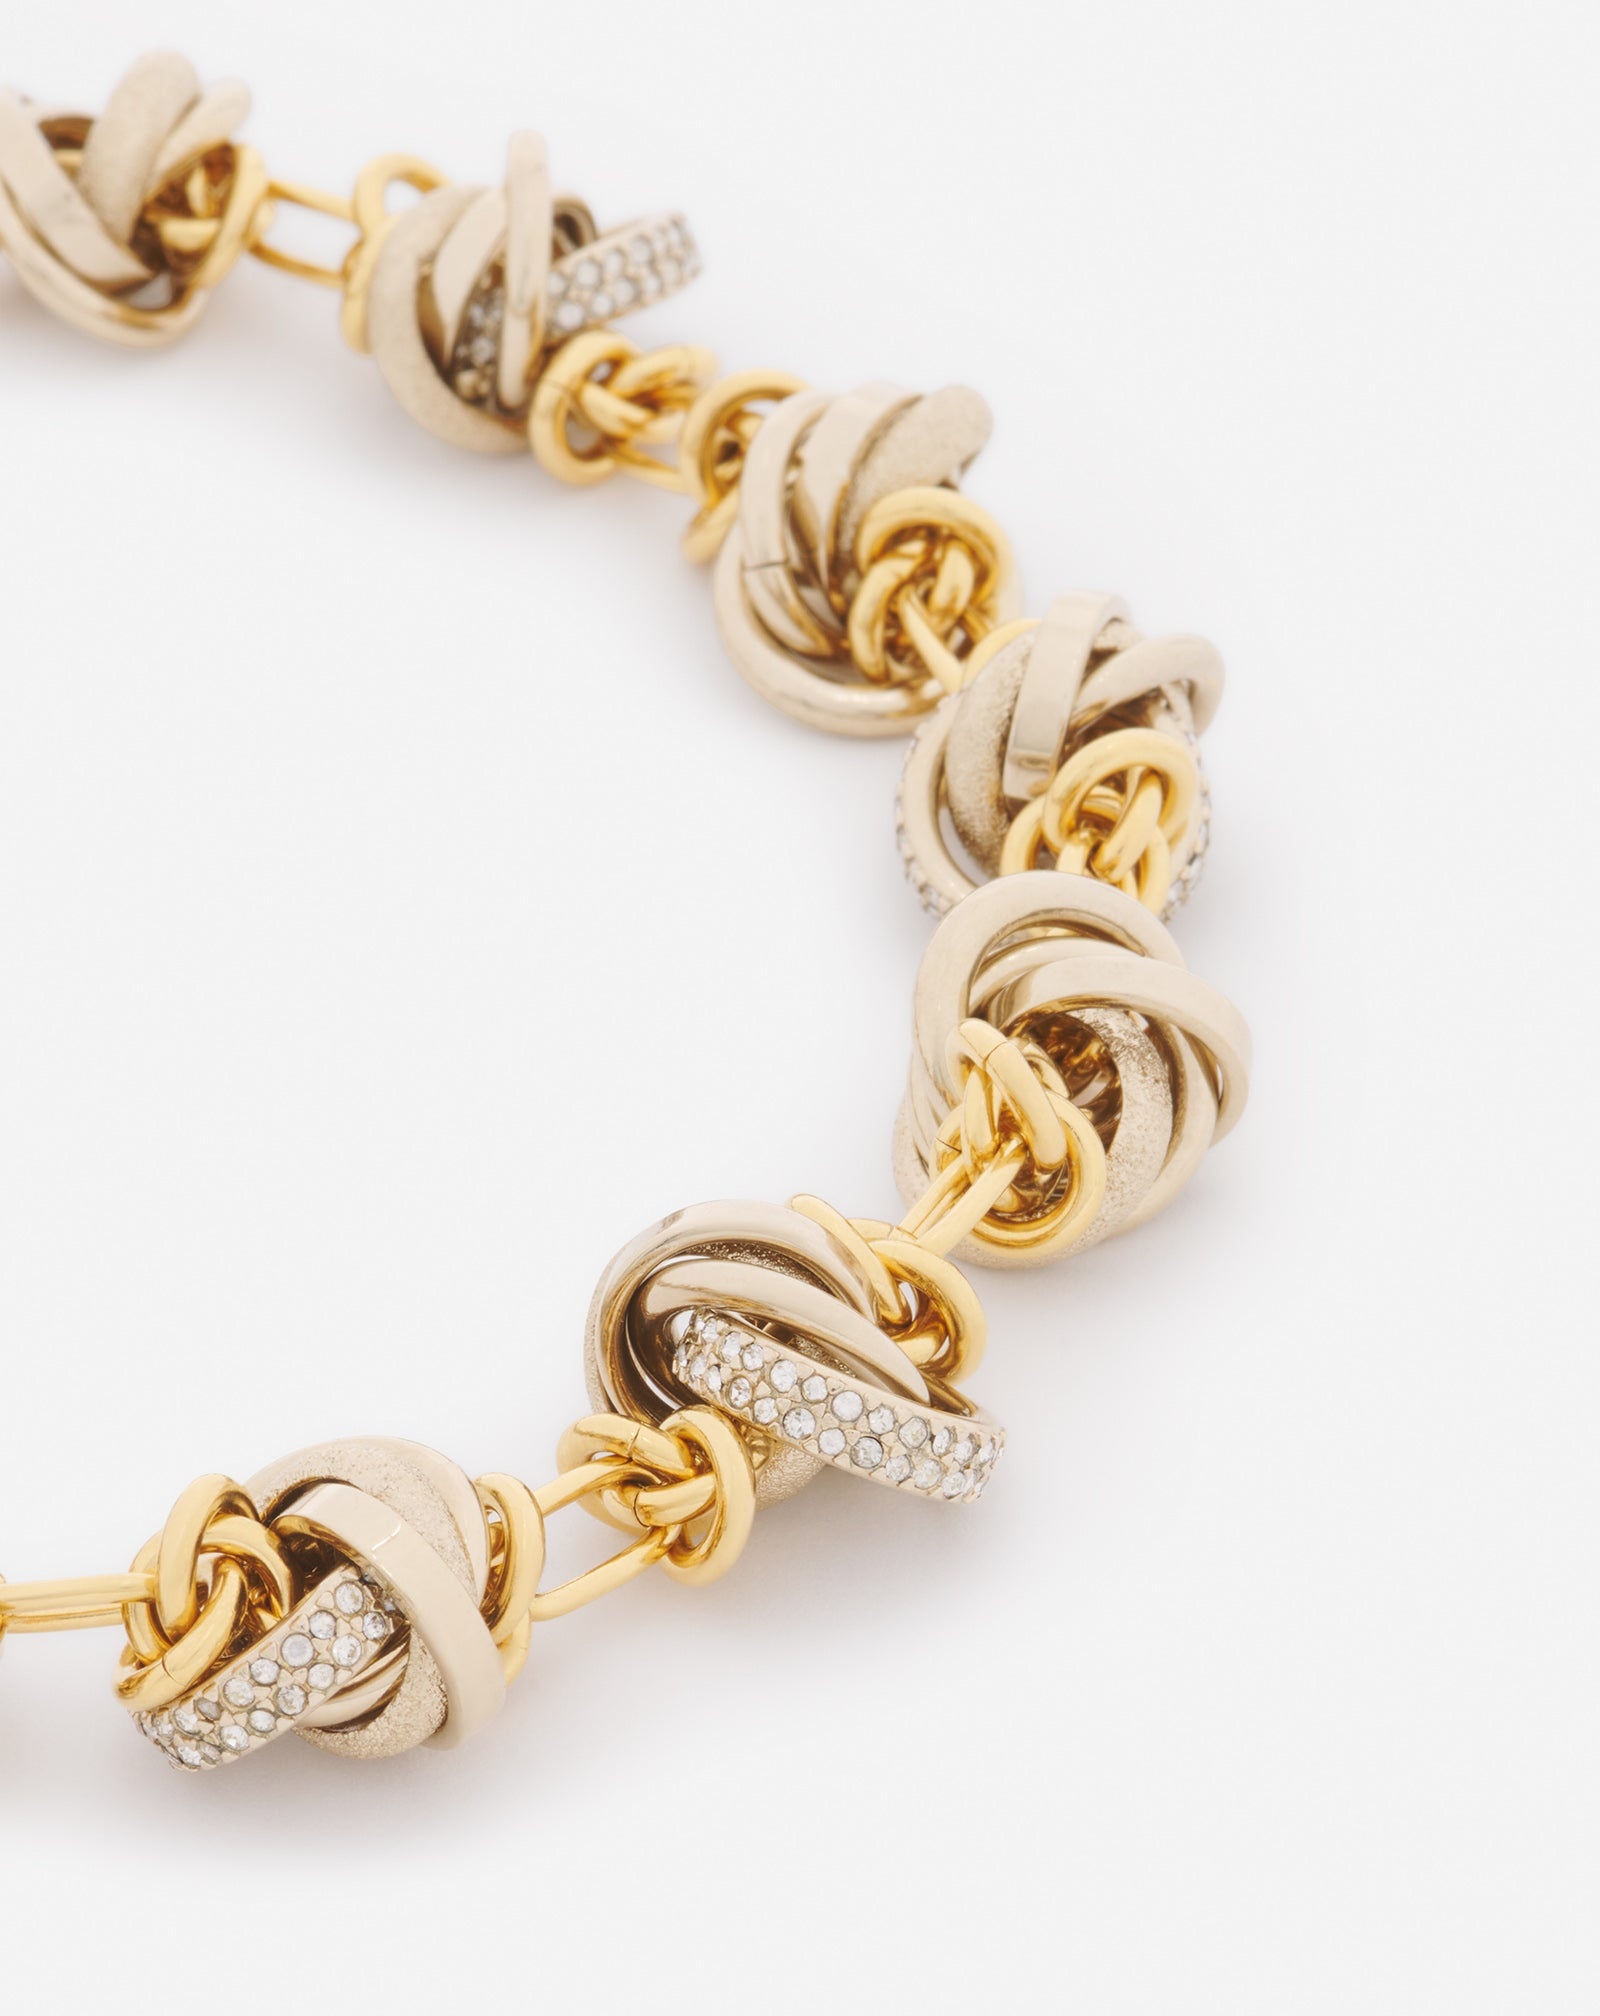 PARTITION BY LANVIN KNOT NECKLACE - 3